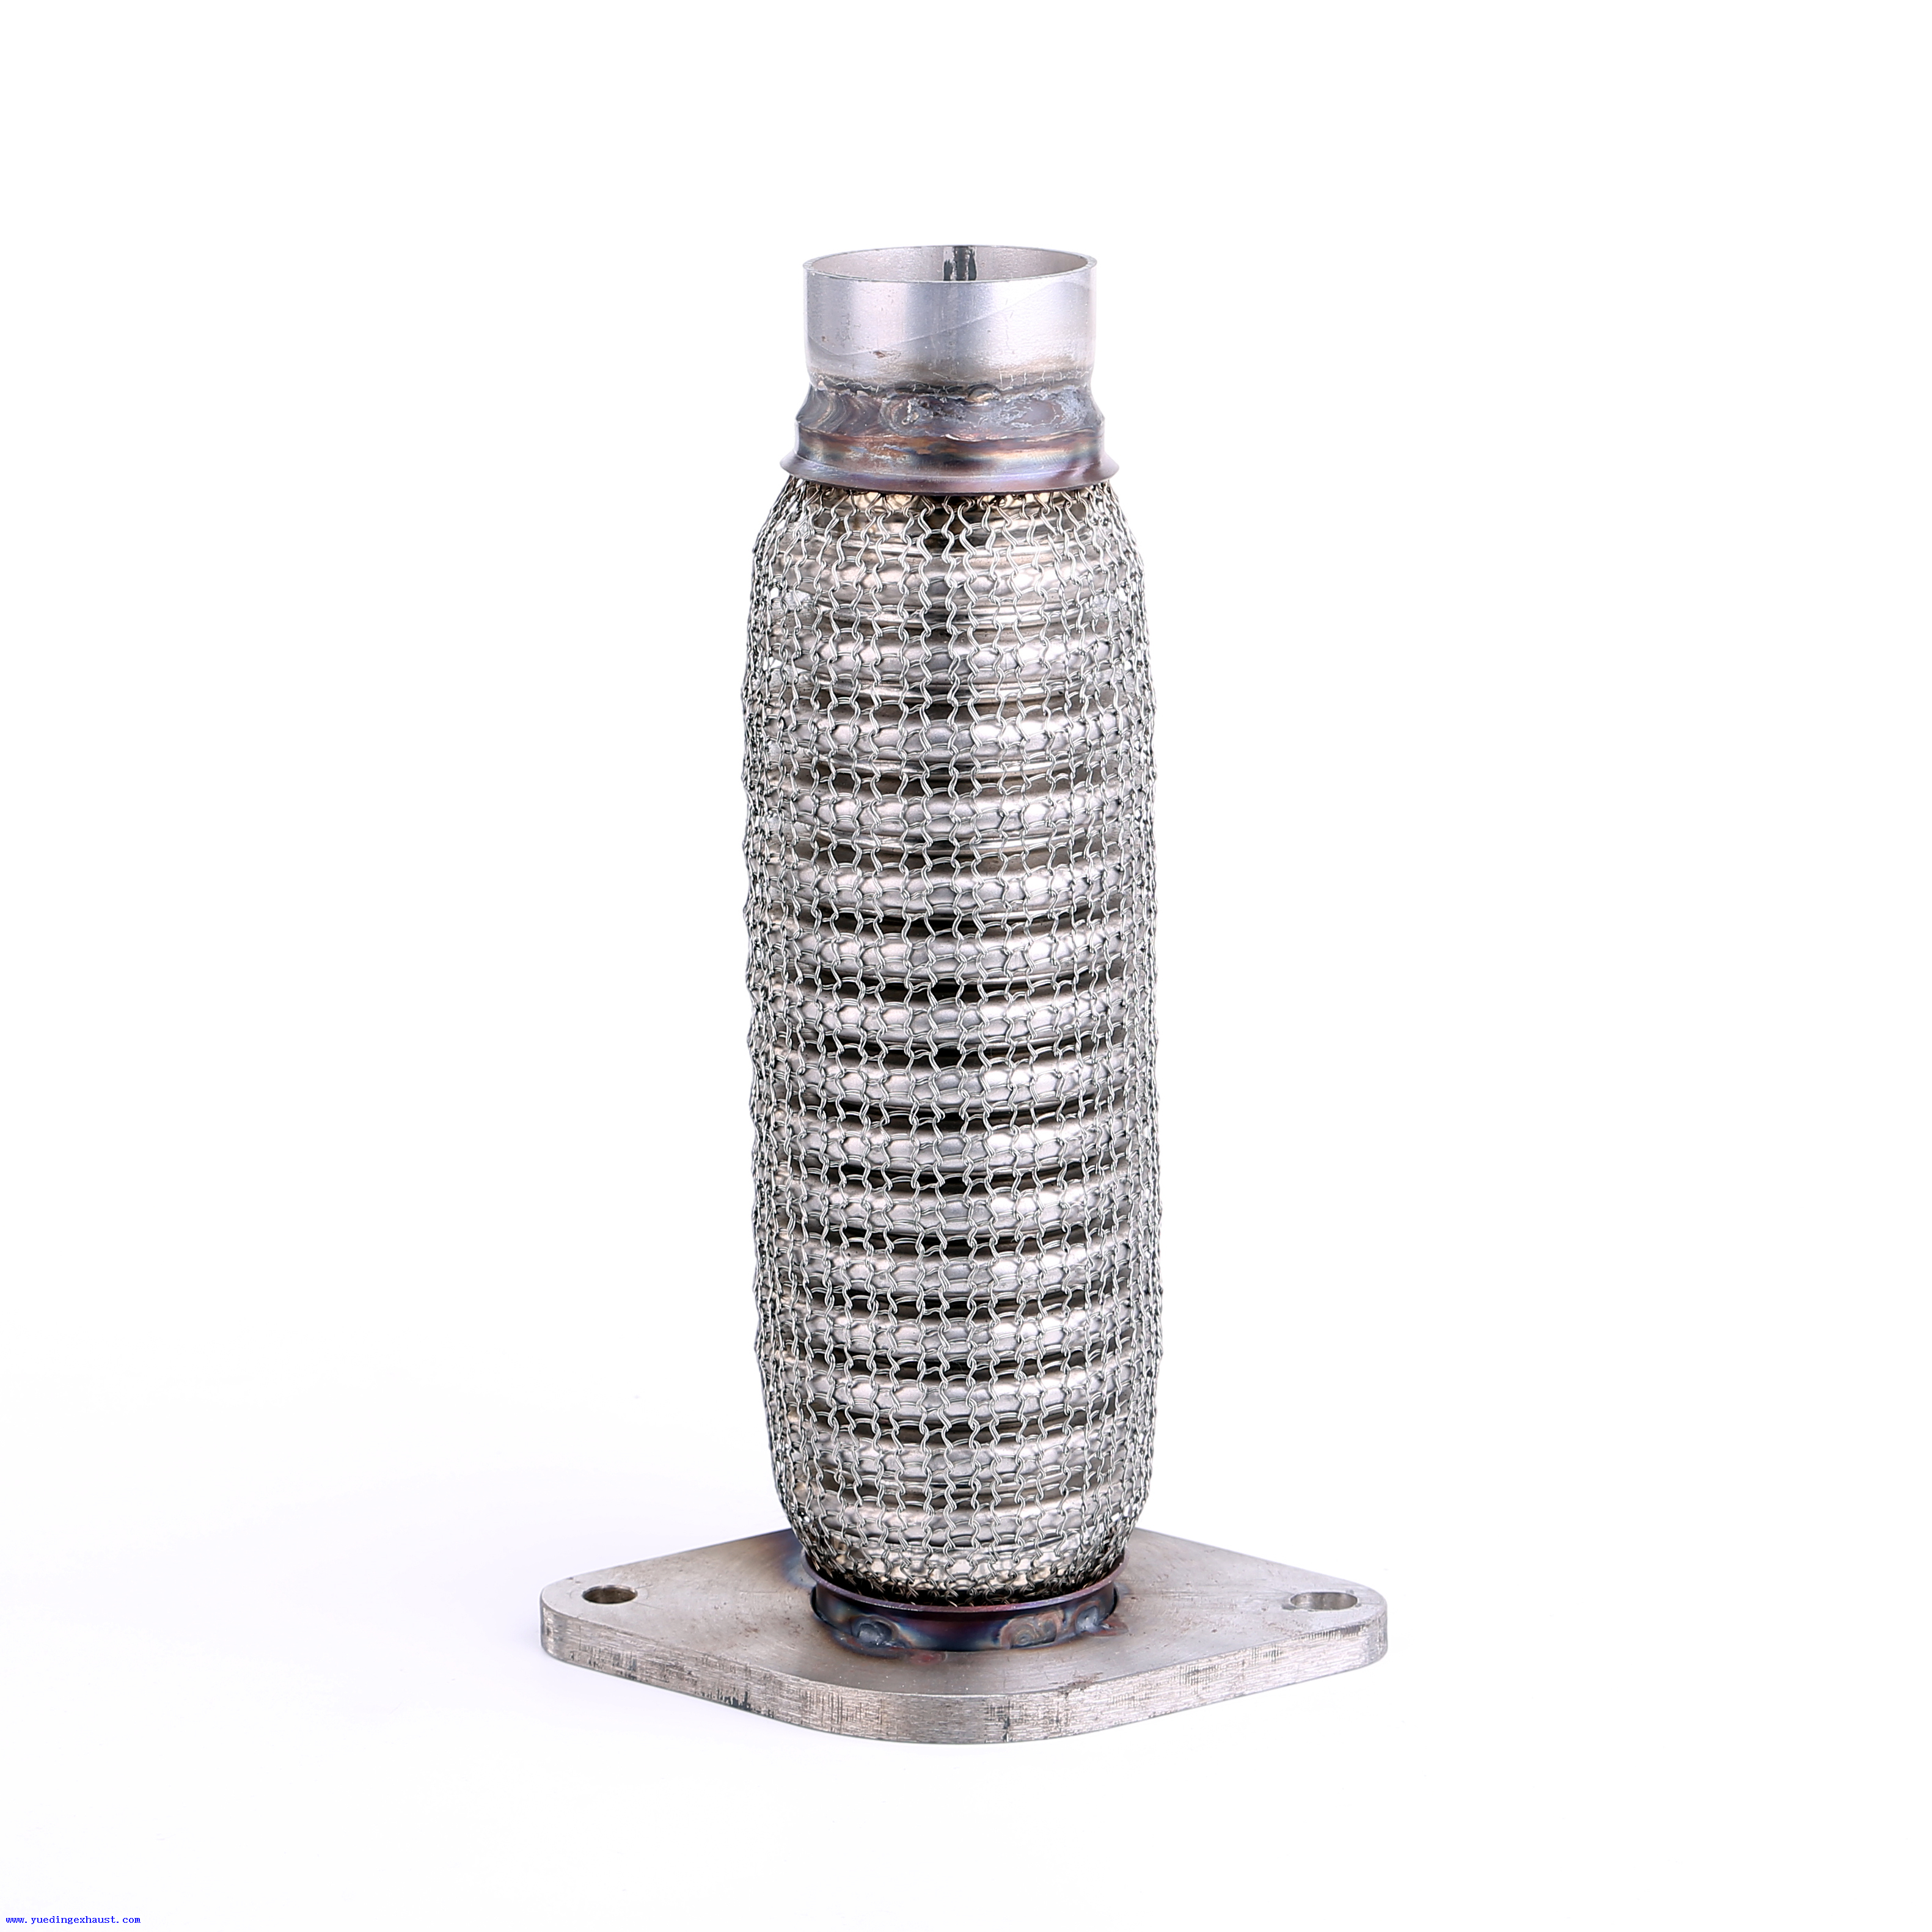 Stainless Steel Auto Mesh Braid Exhaust Flexible Pipe with Flange